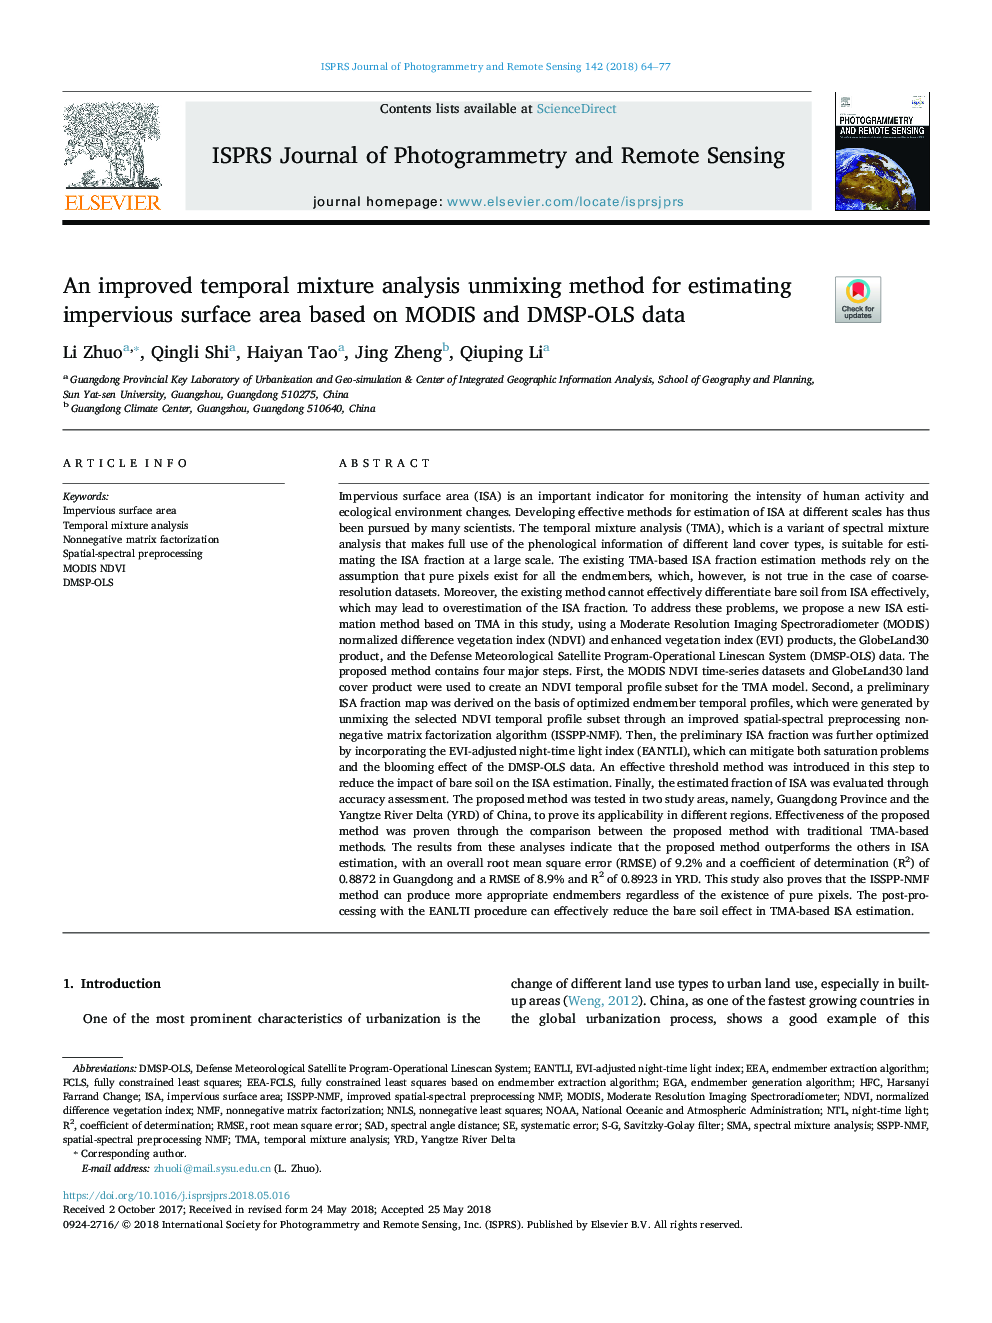 An improved temporal mixture analysis unmixing method for estimating impervious surface area based on MODIS and DMSP-OLS data